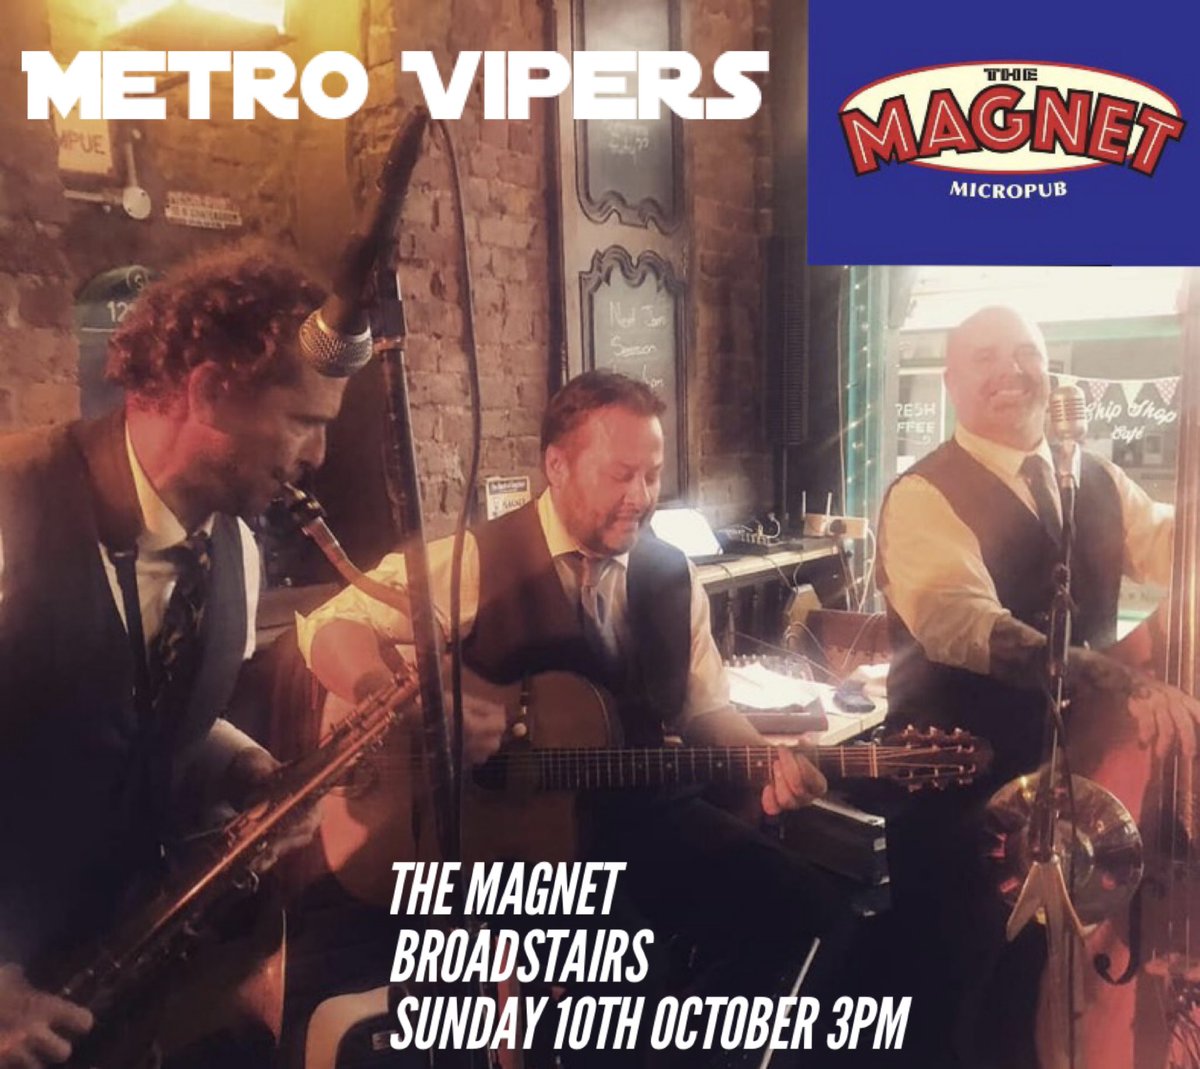 Tomorrow Sunday 10th October 3pm, we’re back at @Themagnetmicro1 ! Come on down and let us tickle your fancies with our crazy blend of swing jazz, mime & amateur dramatics #gypsyjazz #swingjazz #rocknroll #broadstairs #kent #broadstairskent #livemusic